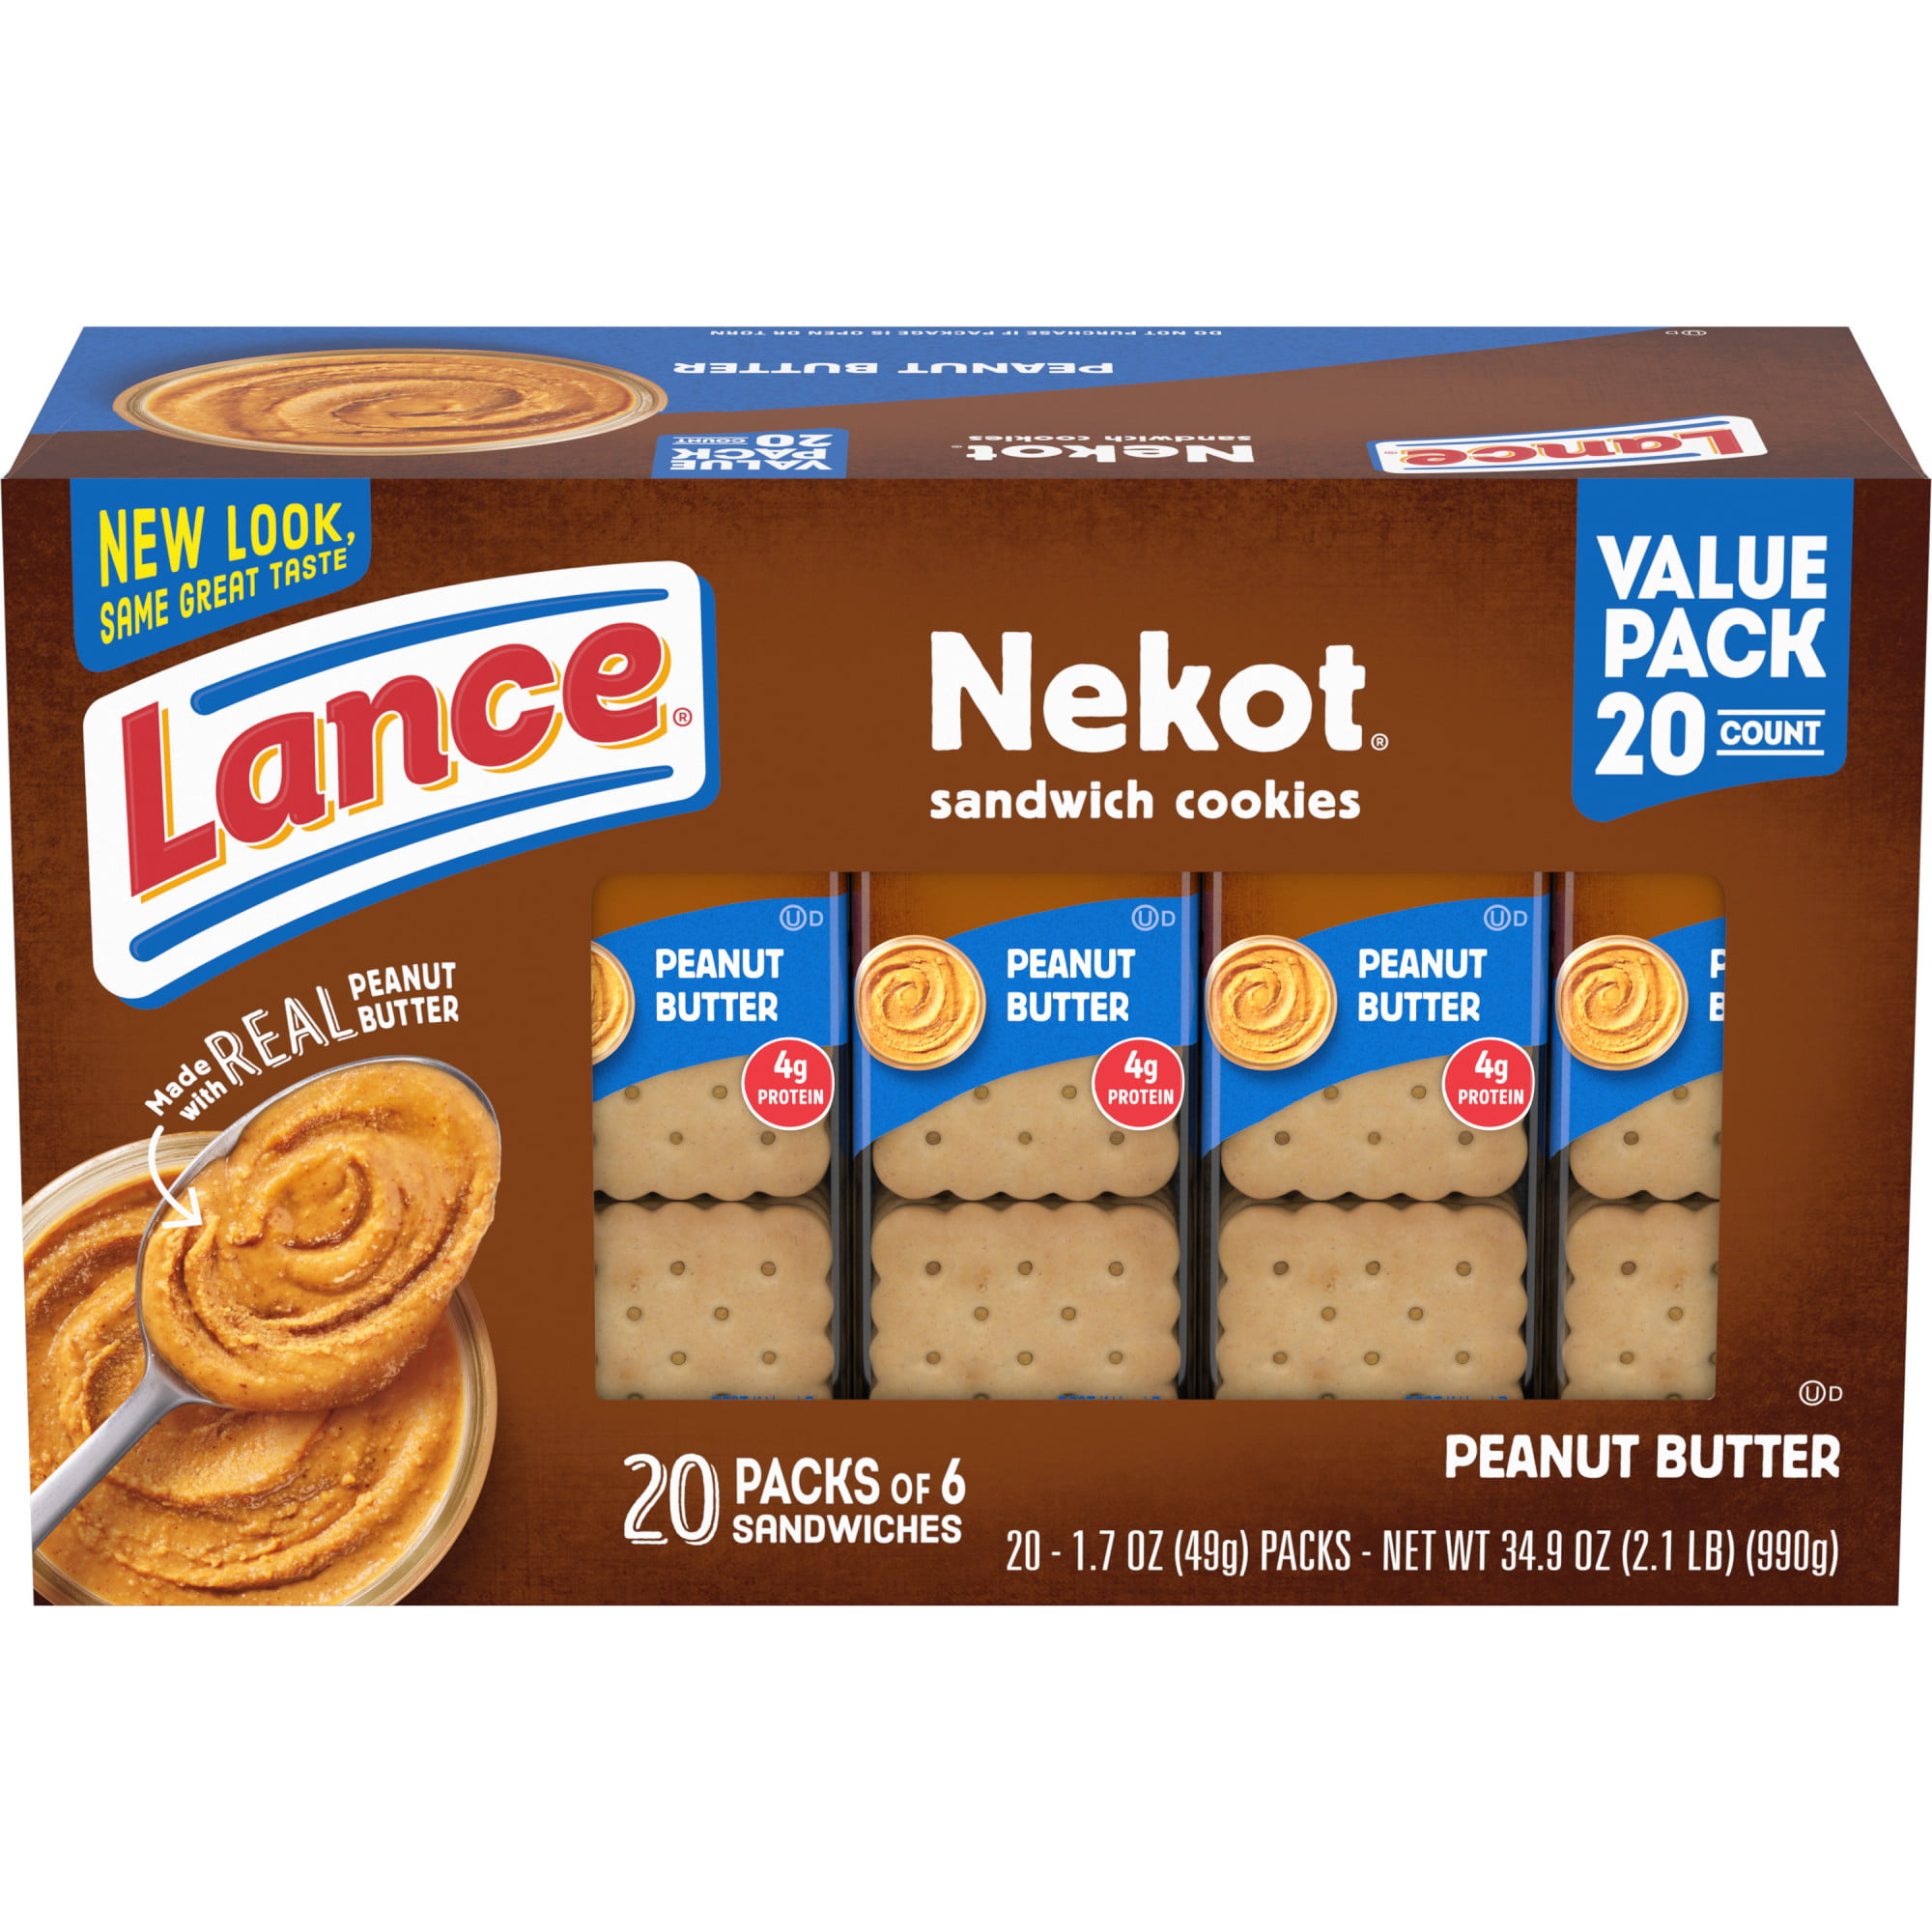 Photo 1 of 6PackLance Sandwich Cookies, Nekot Peanut Butter, Value Pack 20 Ct Box----exp date 05-2023